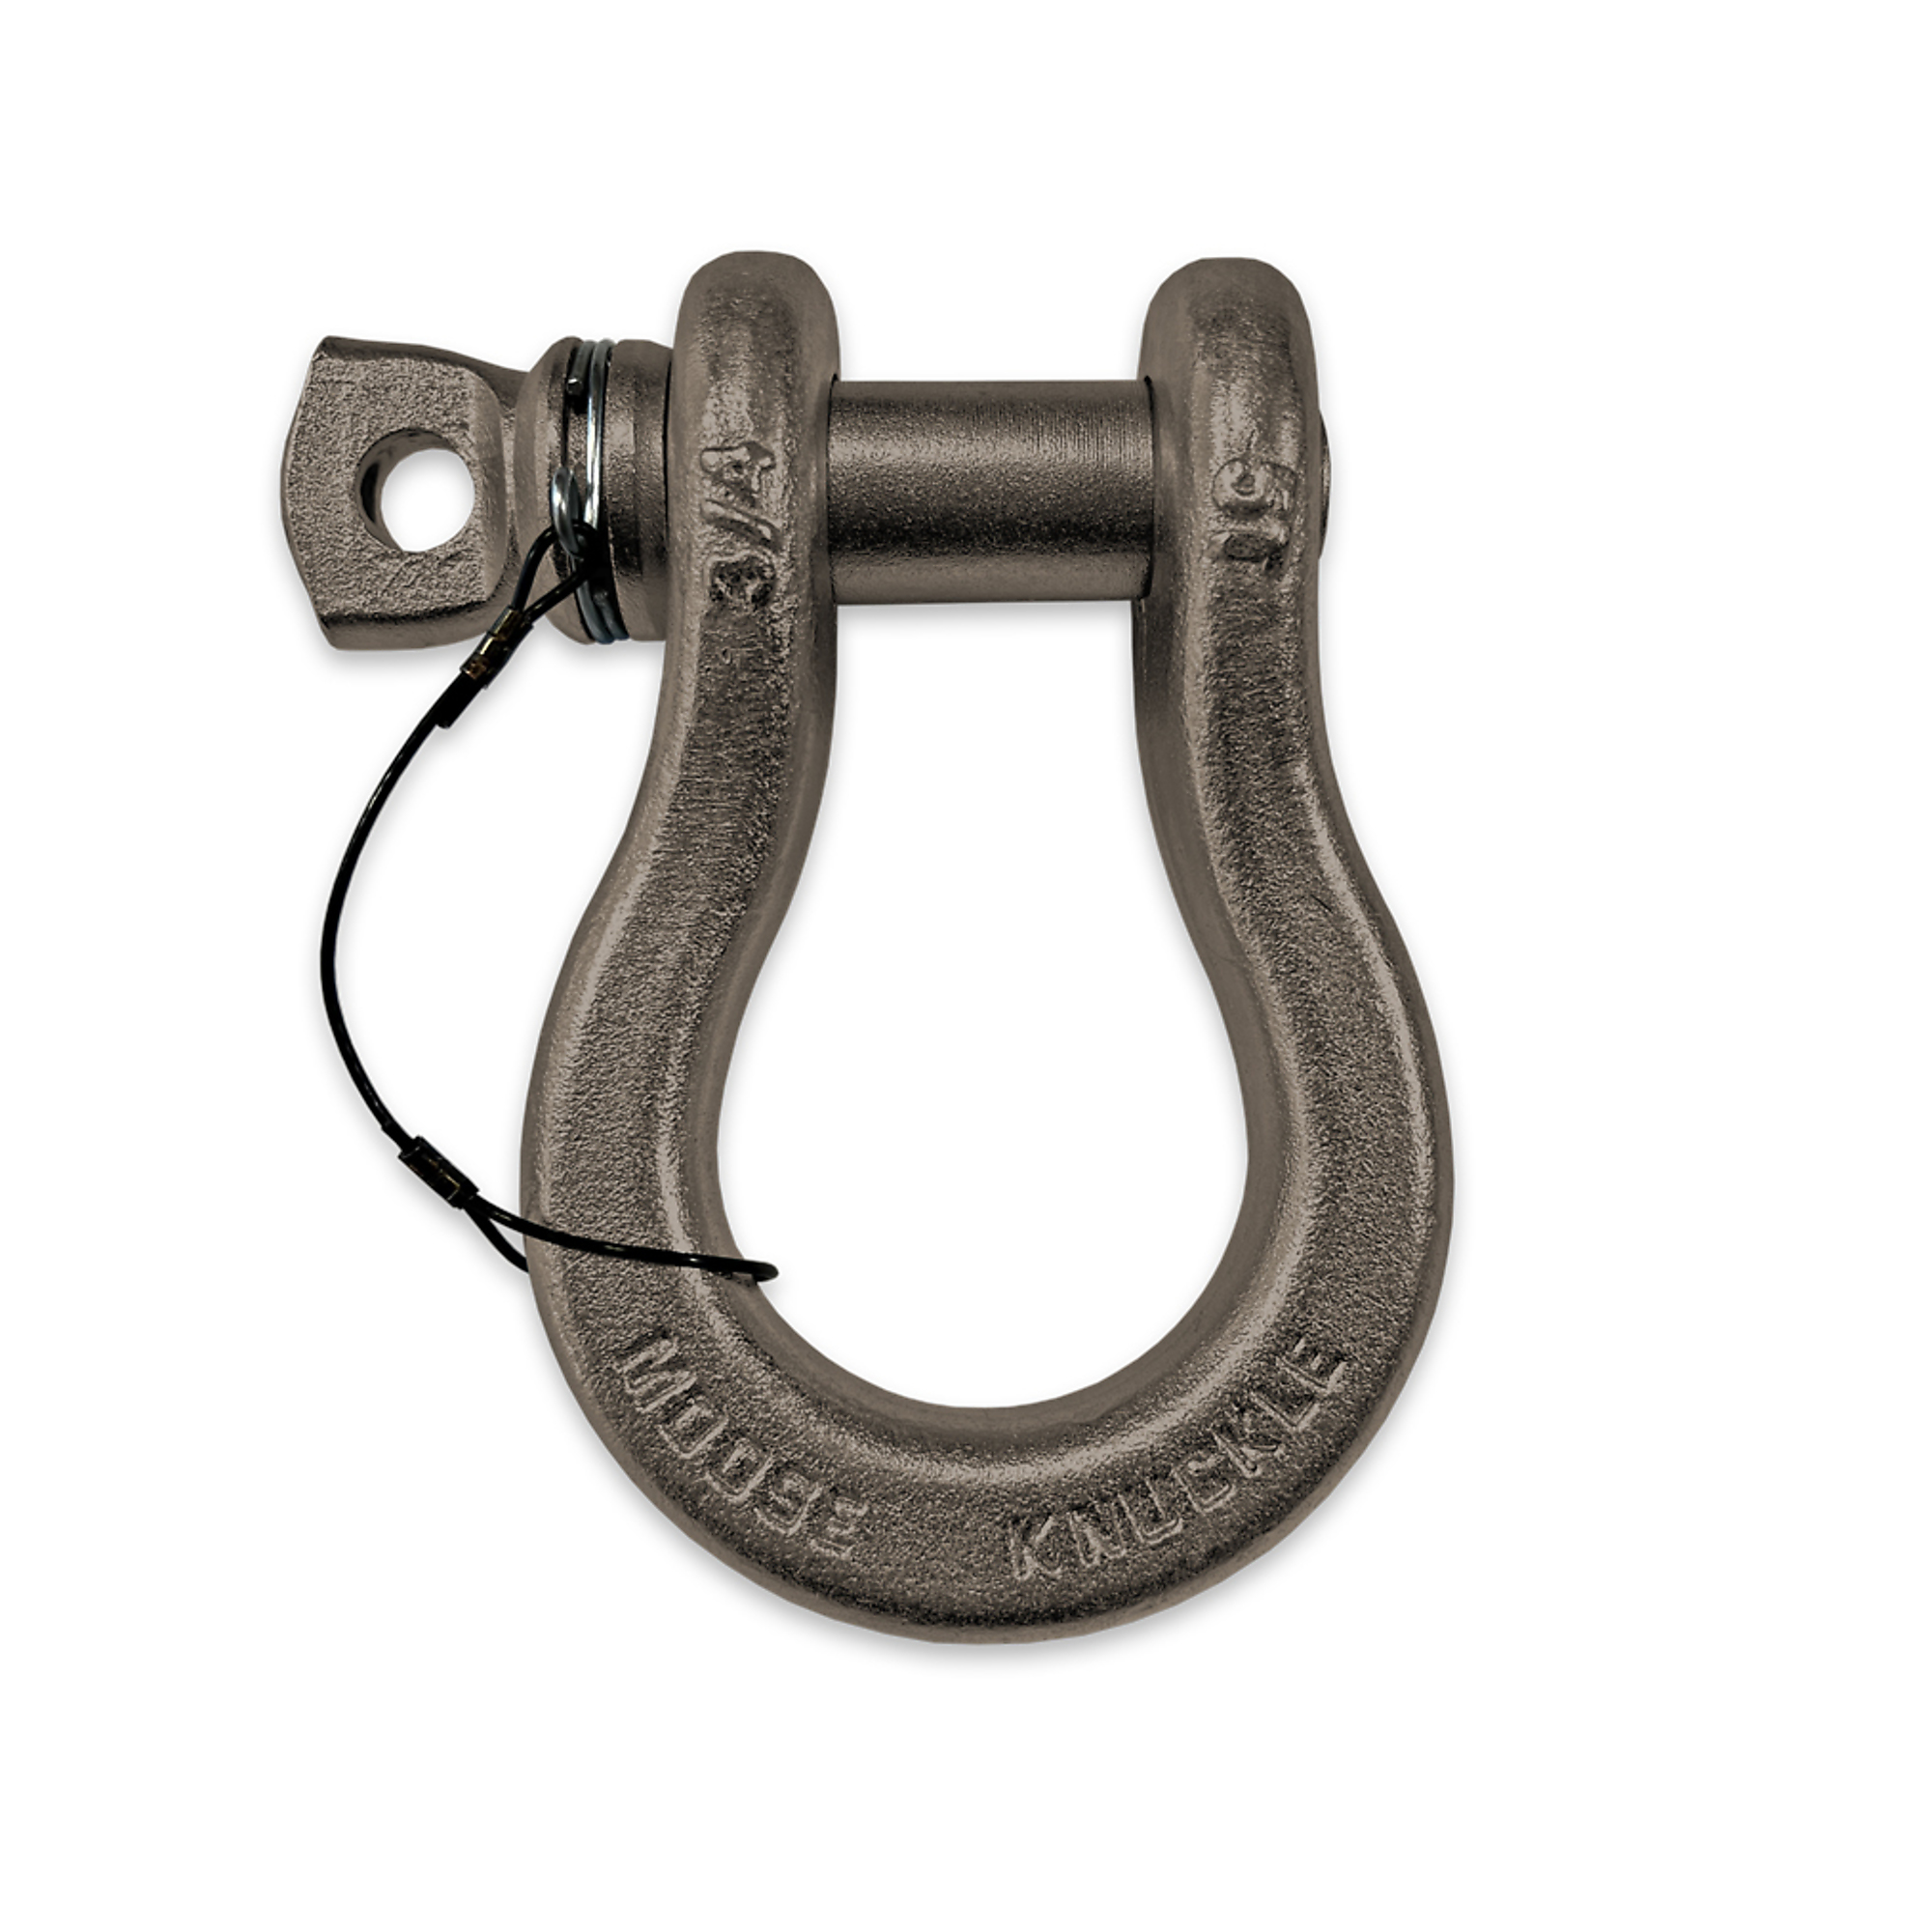 Moose Knuckle Offroad, Raw Dog Uncoated Recovery Lanyard Spin Pin 3/4 Shackle, Working Load Limit 10000 lb, Model FN000023-013